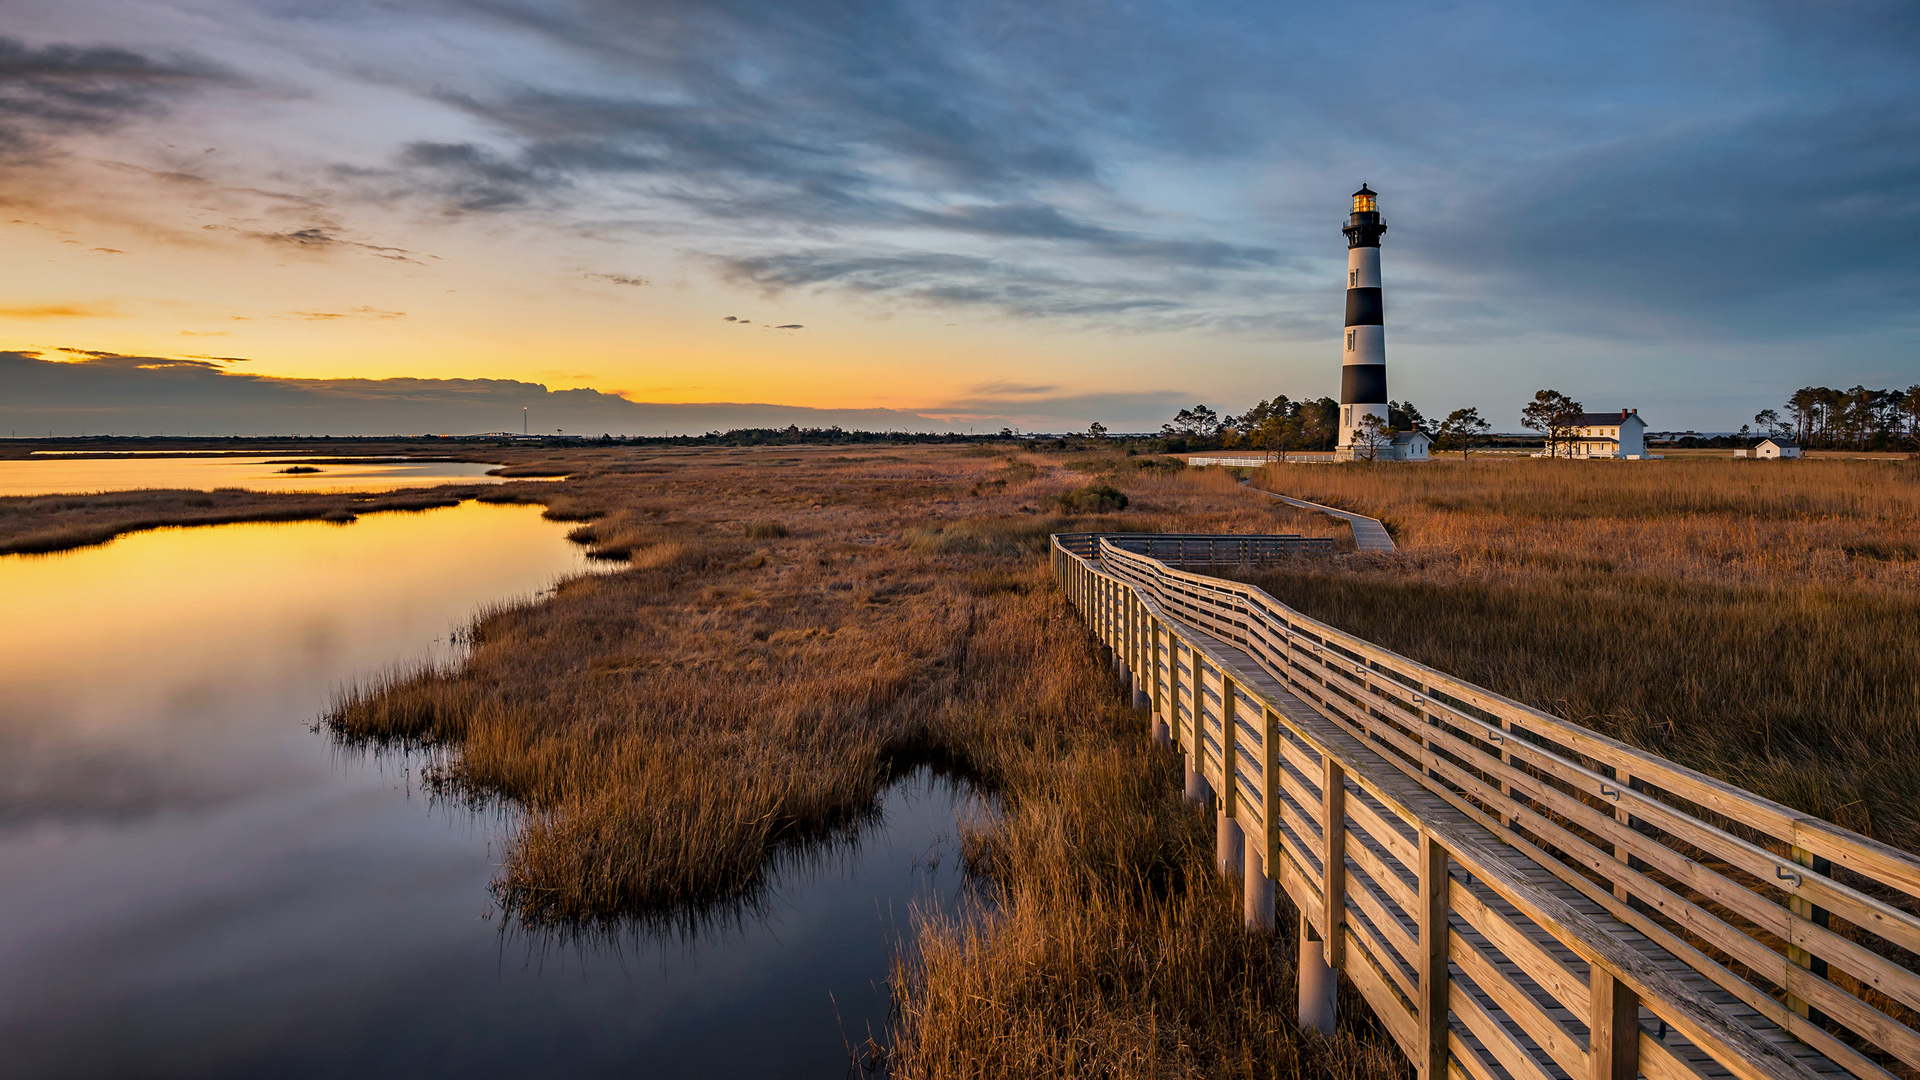 General 1920x1080 nature landscape far view wooden walkway clouds sky sunset house lighthouse water plants grass trees Bodie Island Lighthouse North Carolina USA